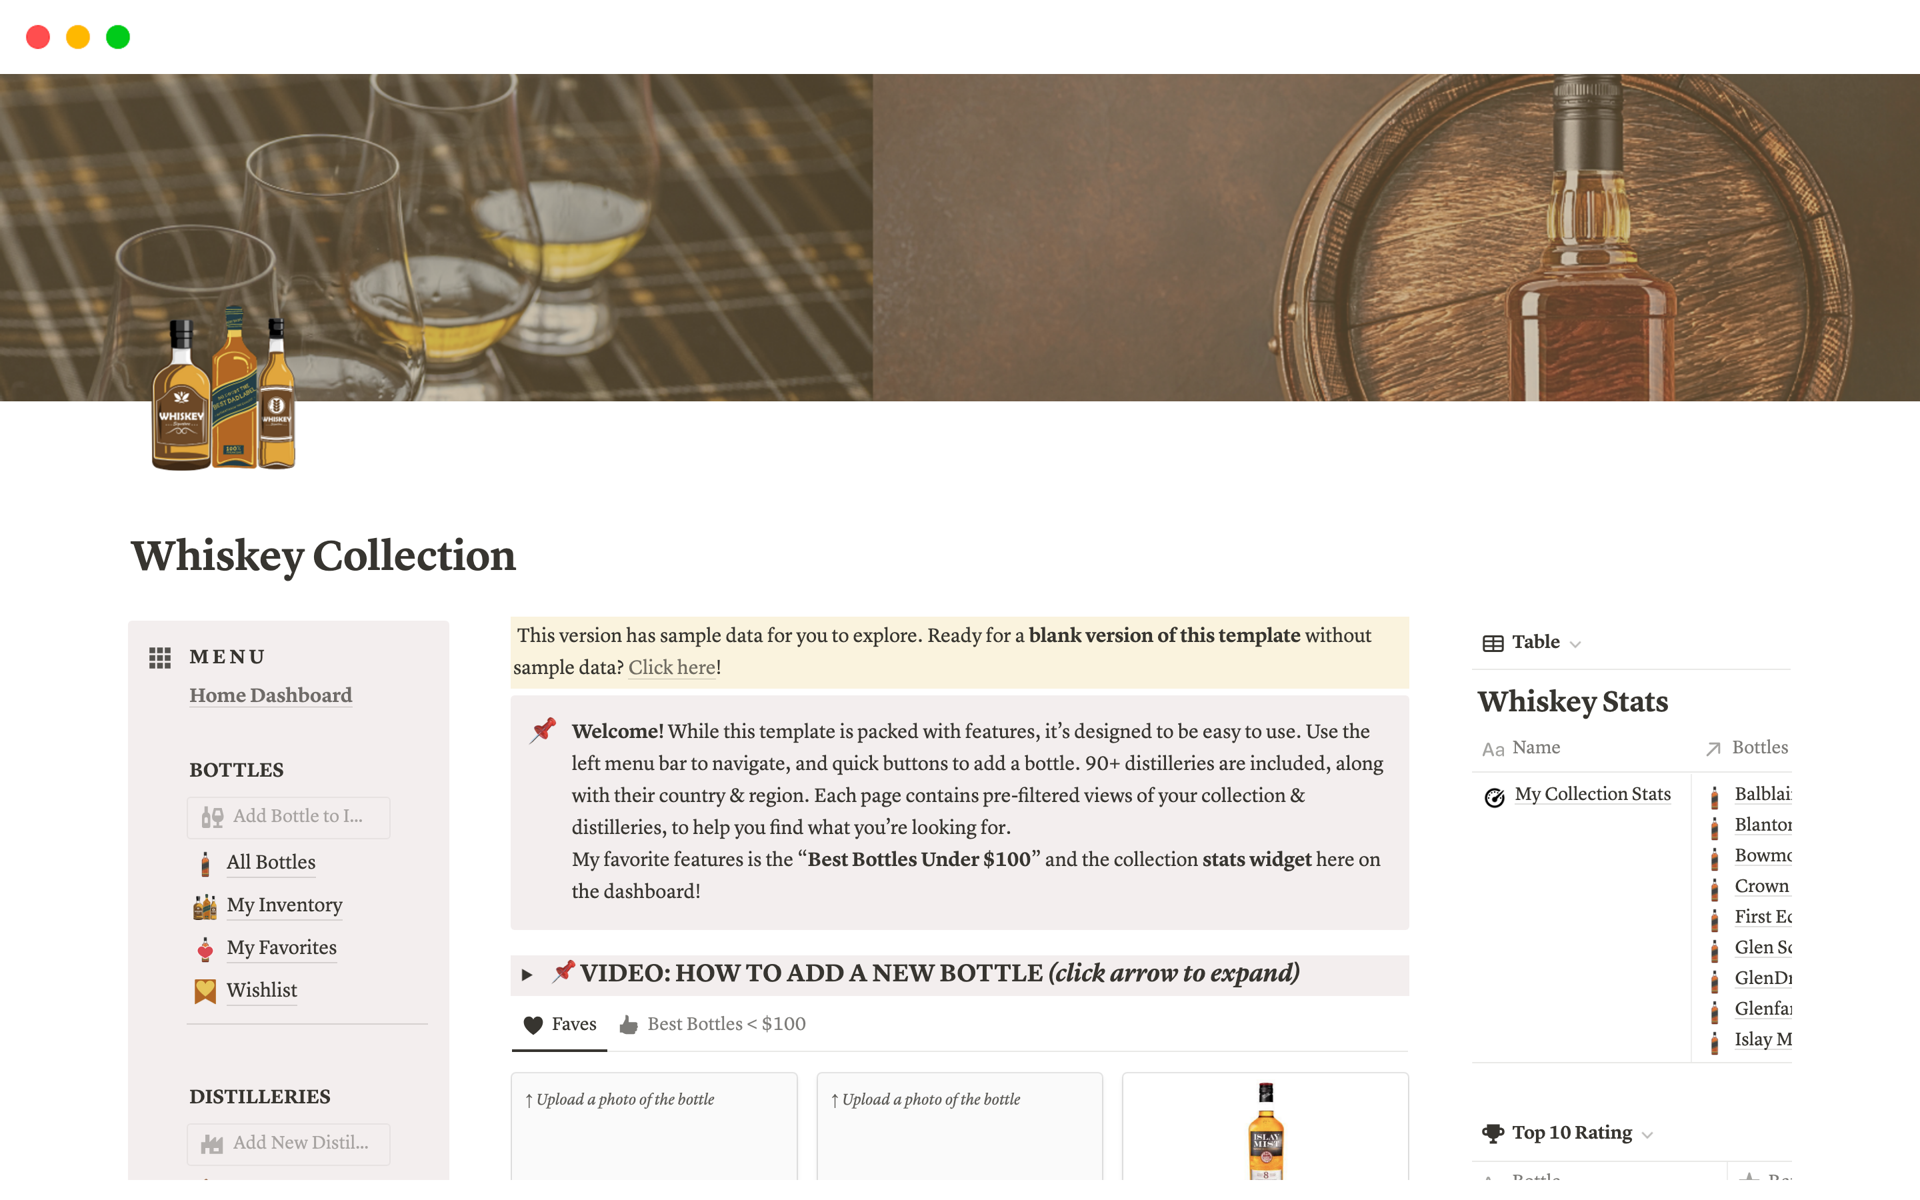 Save and explore your growing whiskey / whisky collection, distilleries, flavor profiles, production & cask details, favorites, and SO much more!